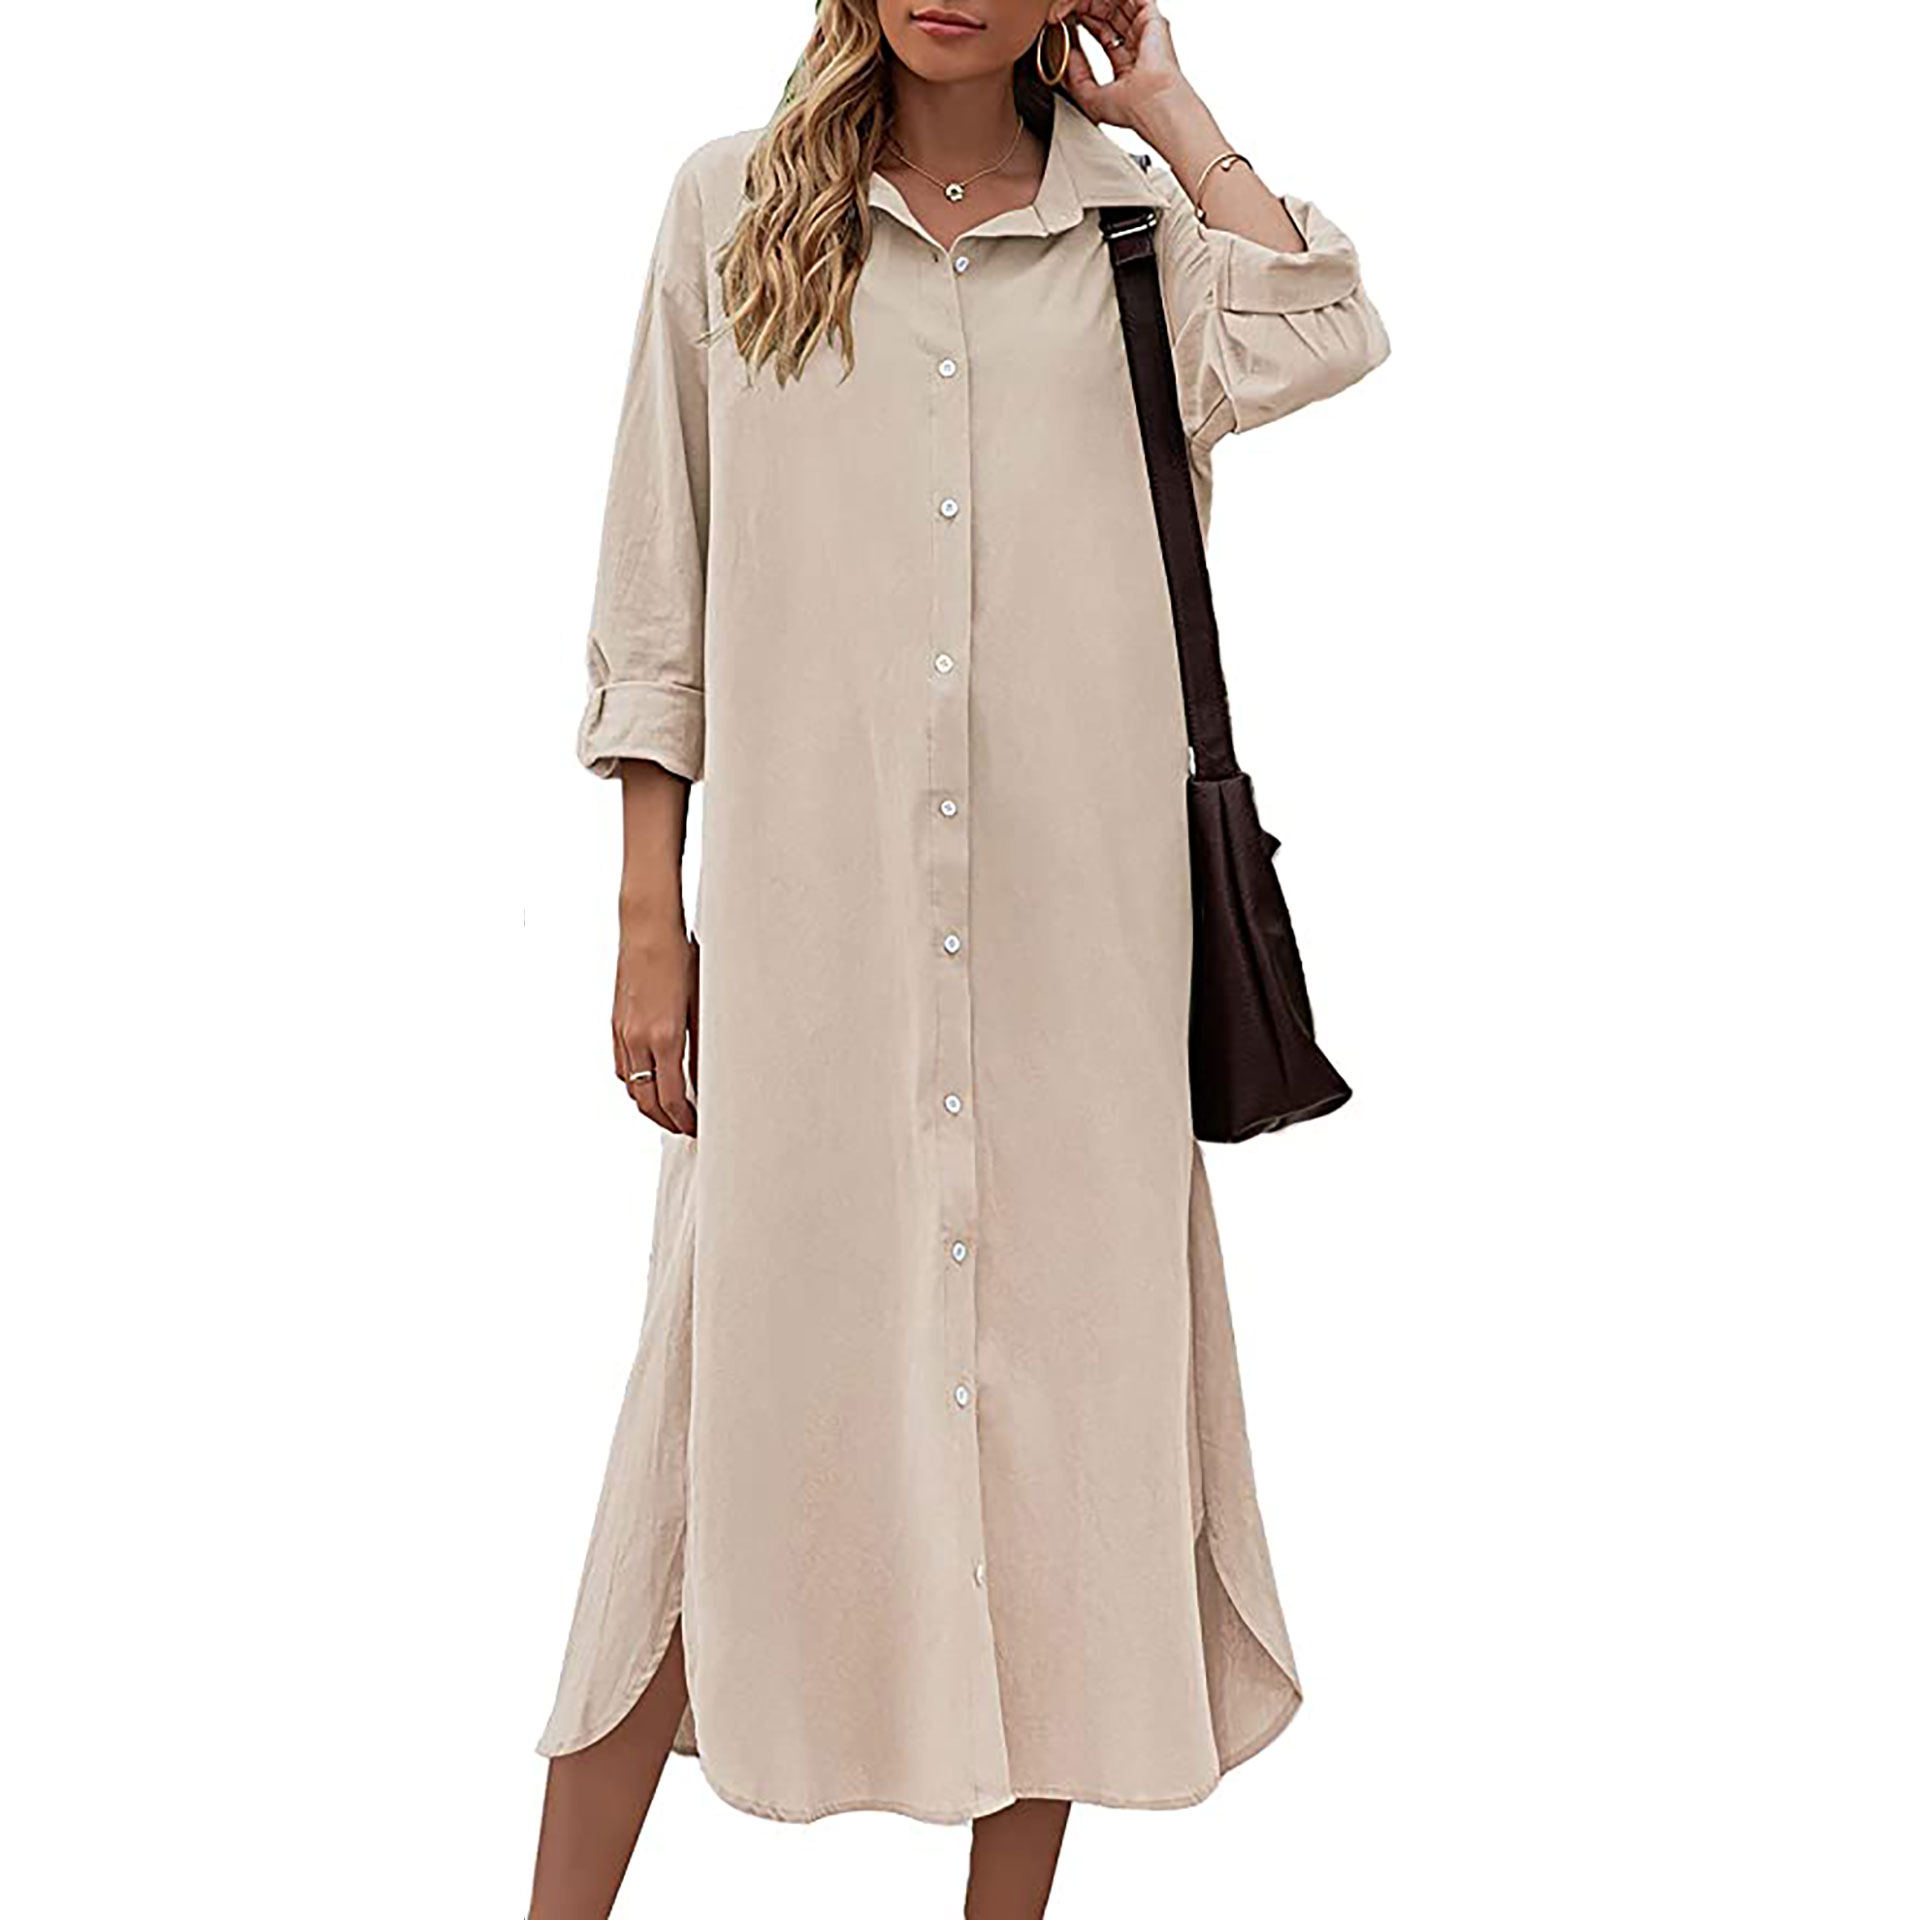 cruise wear for mature ladies